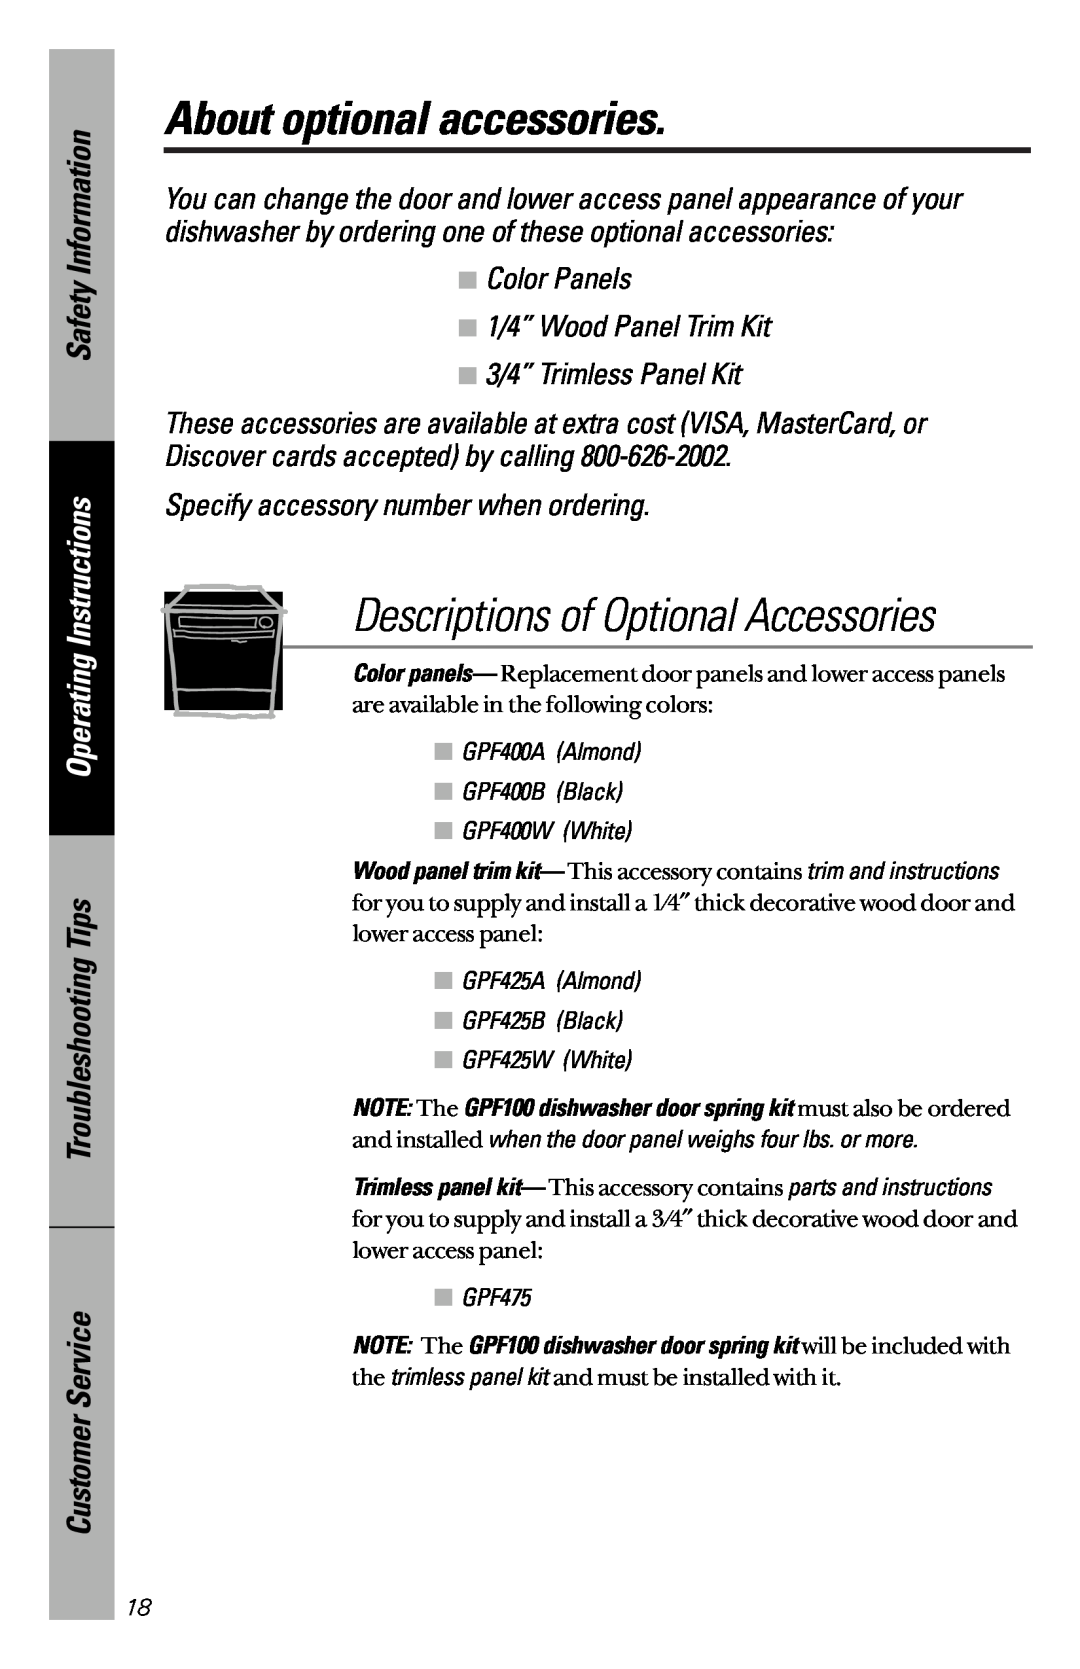 GE GSD3600 series owner manual About optional accessories, Descriptions of Optional Accessories, Safety Information, GPF475 